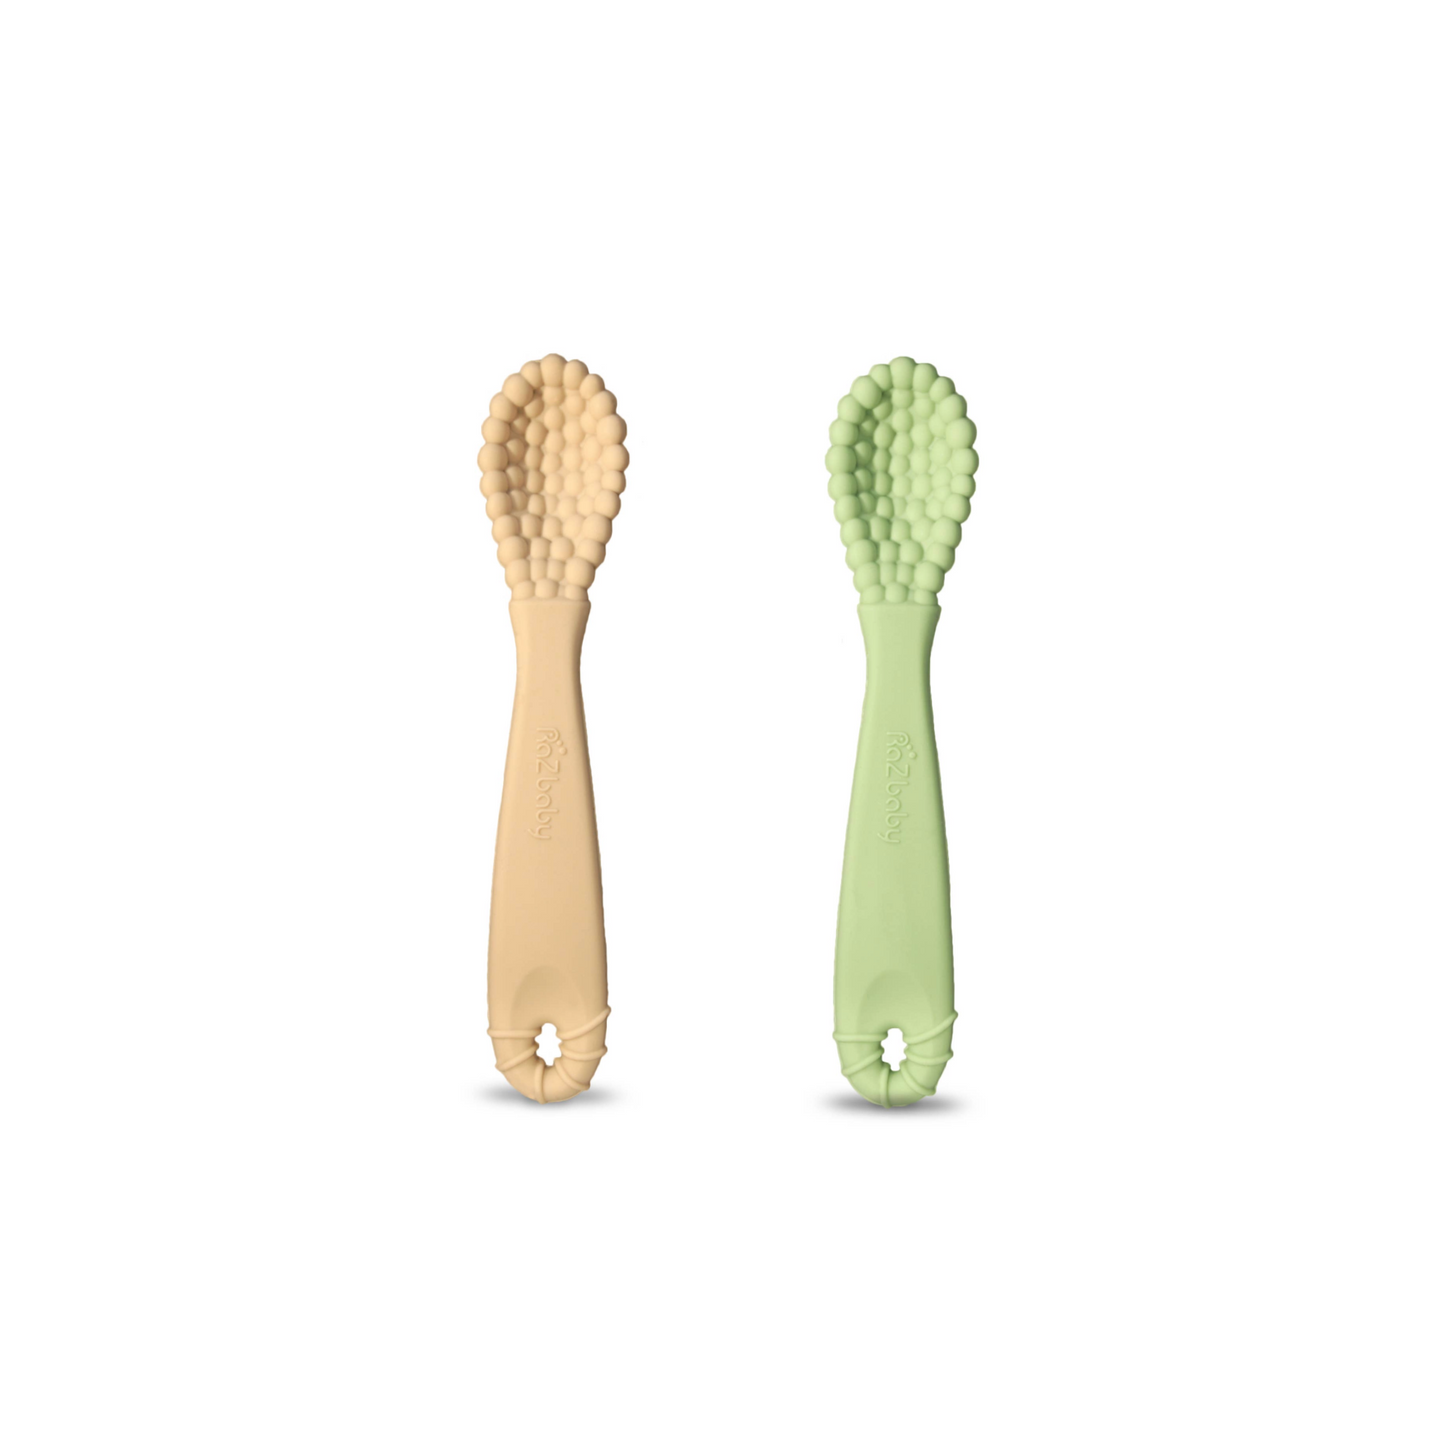 Baby's First Spoon - RaZberry Silicone Training Spoons - 2 pack